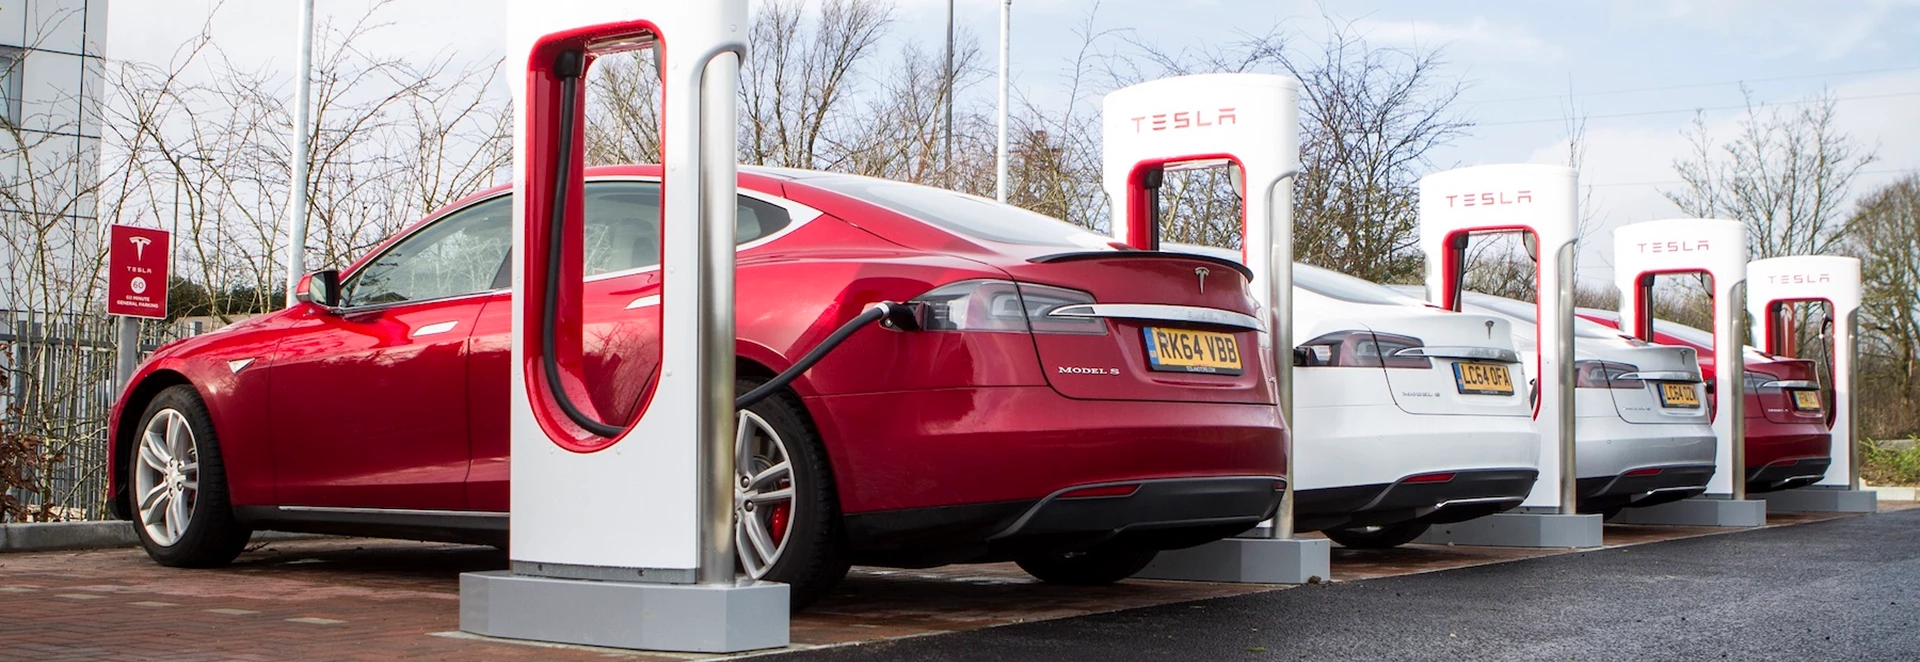 Tesla relaunches free lifetime access to Supercharger network 